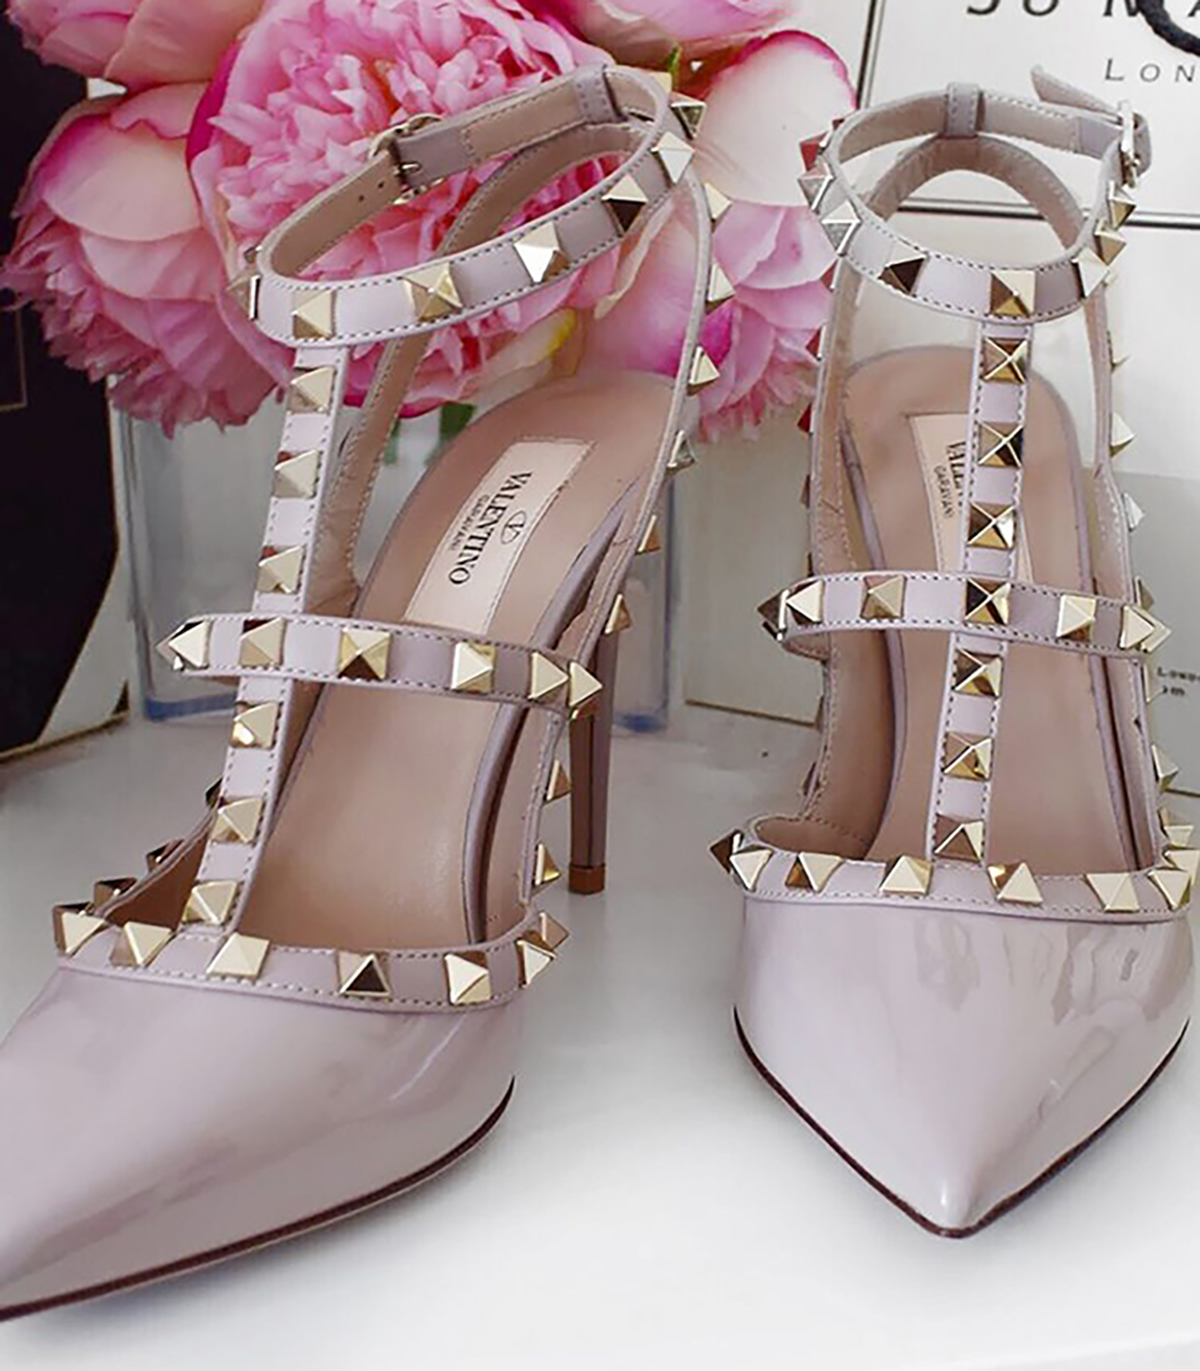 The Valentino Shoe Review